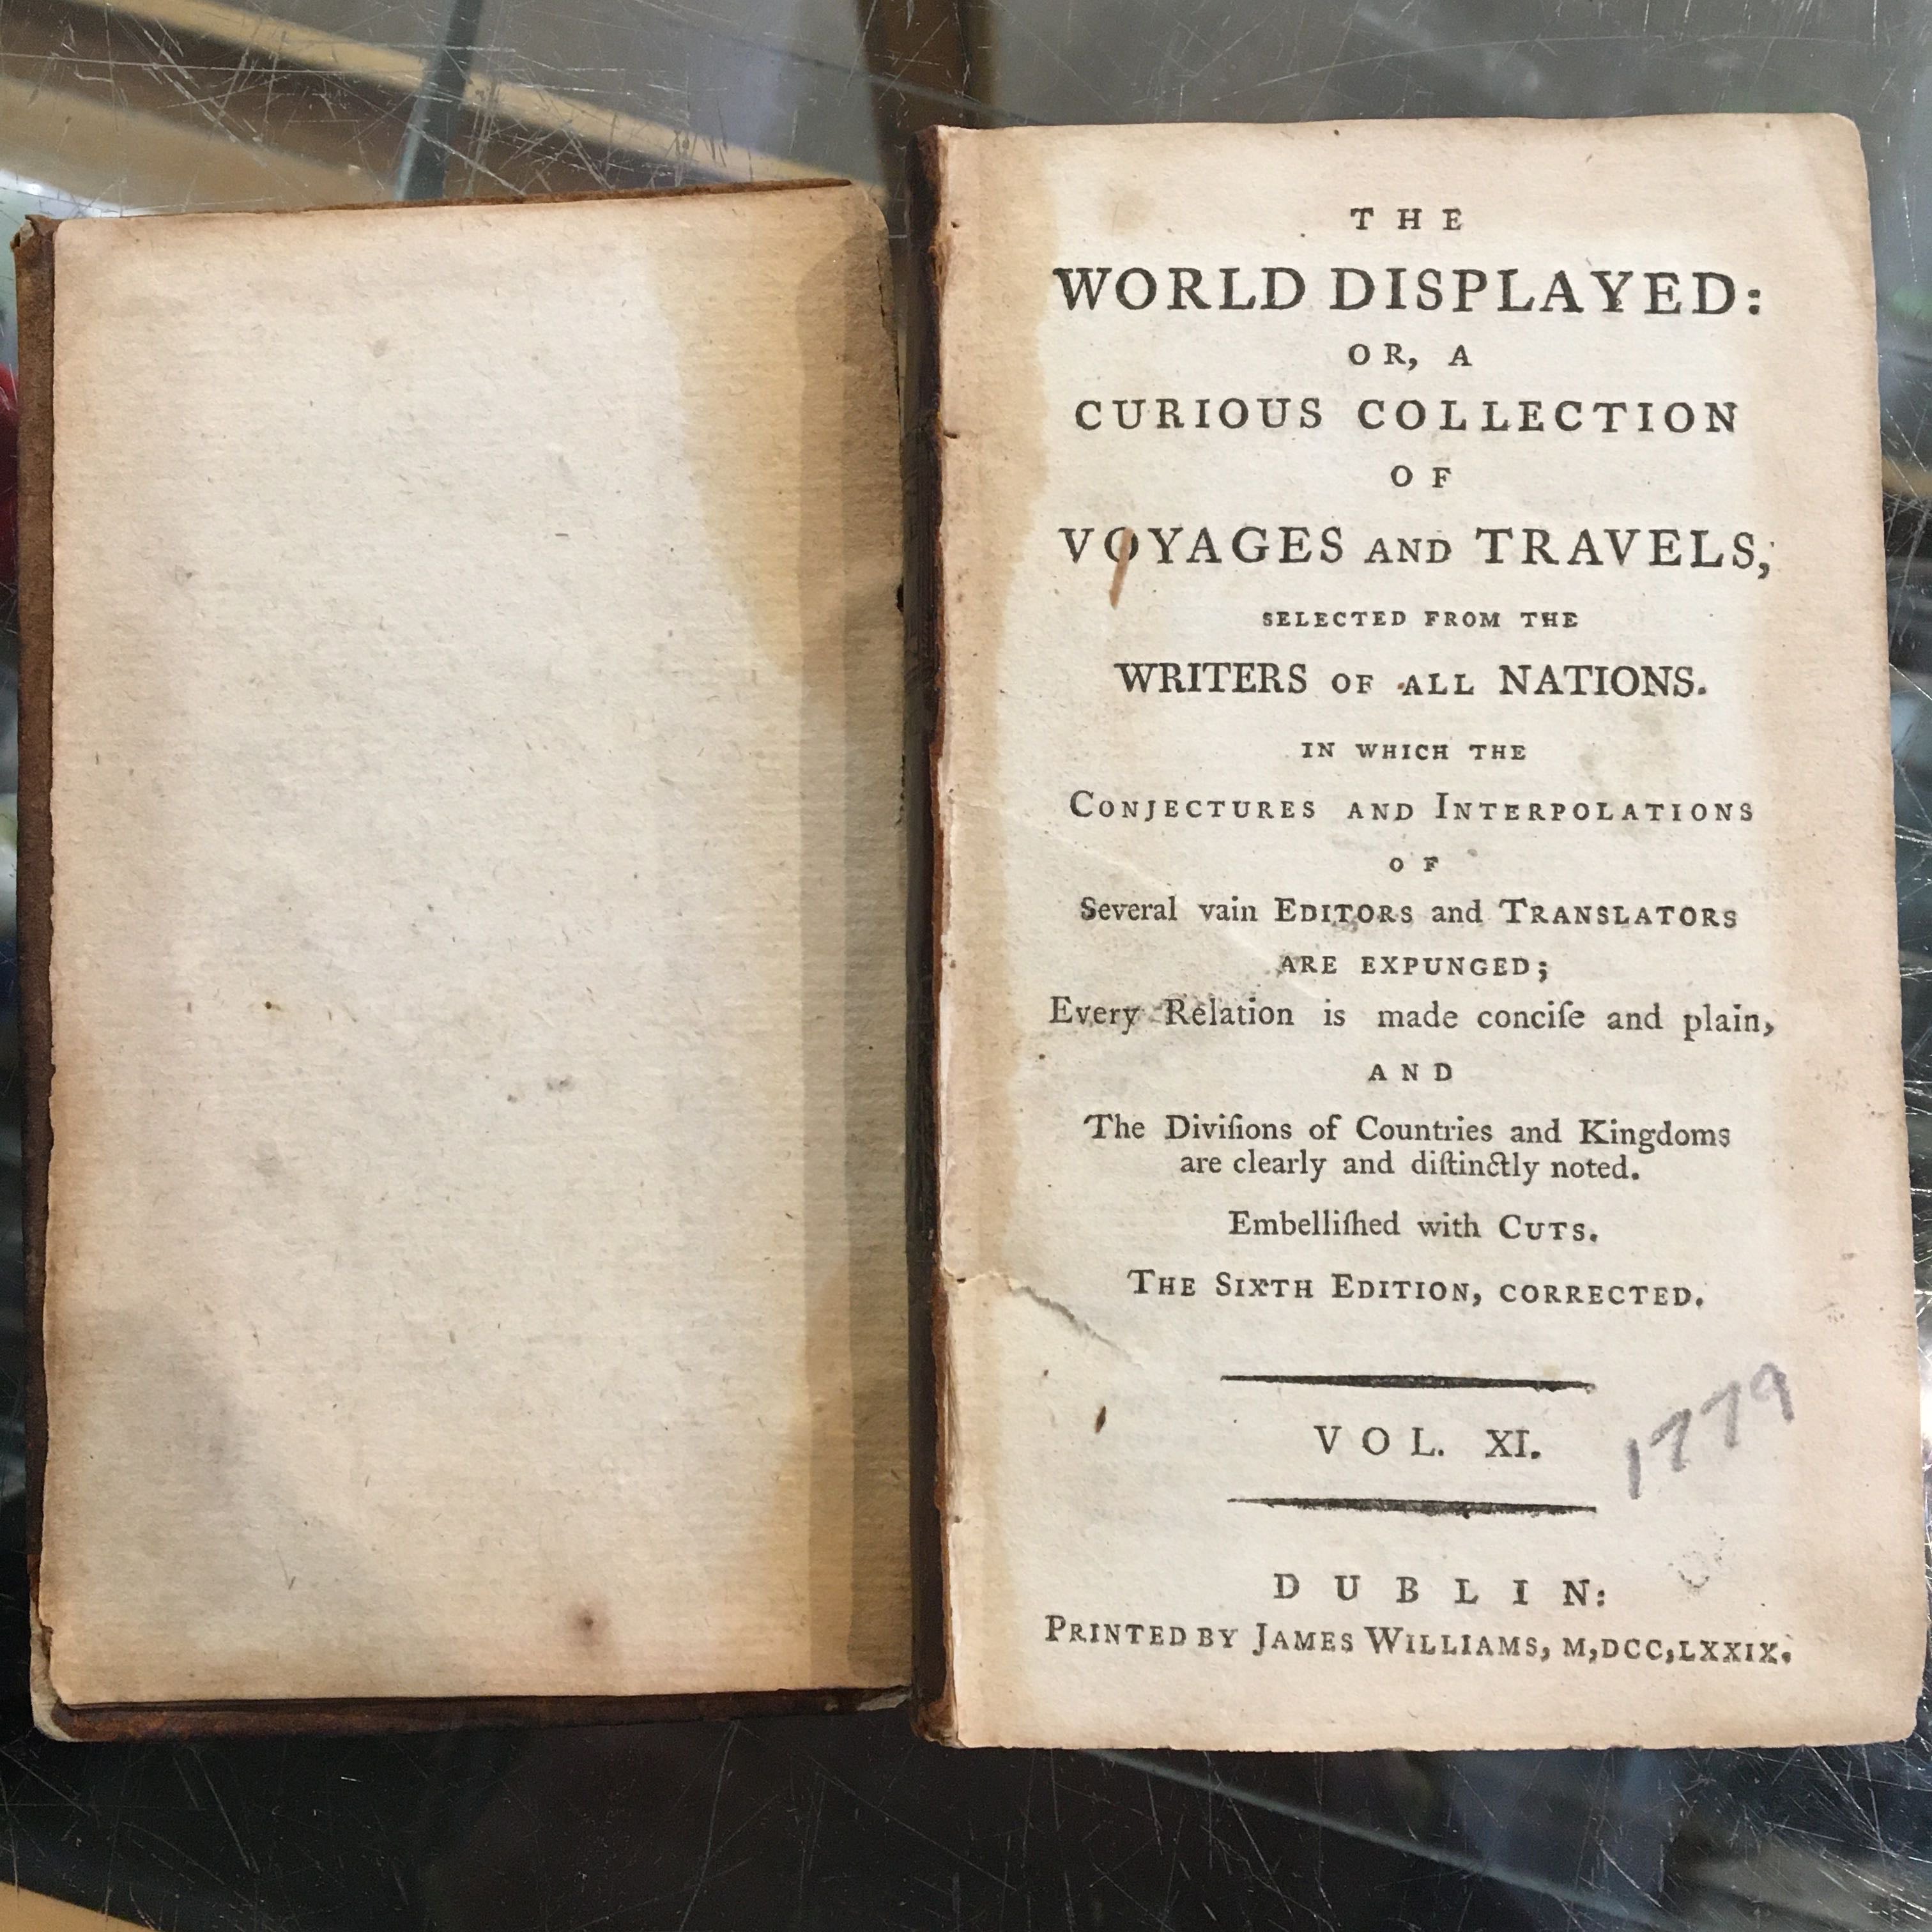 The World Displayed or a Curious Collection of Voyages 7 Travels Vol 11 1779 Dublin Ireland Book